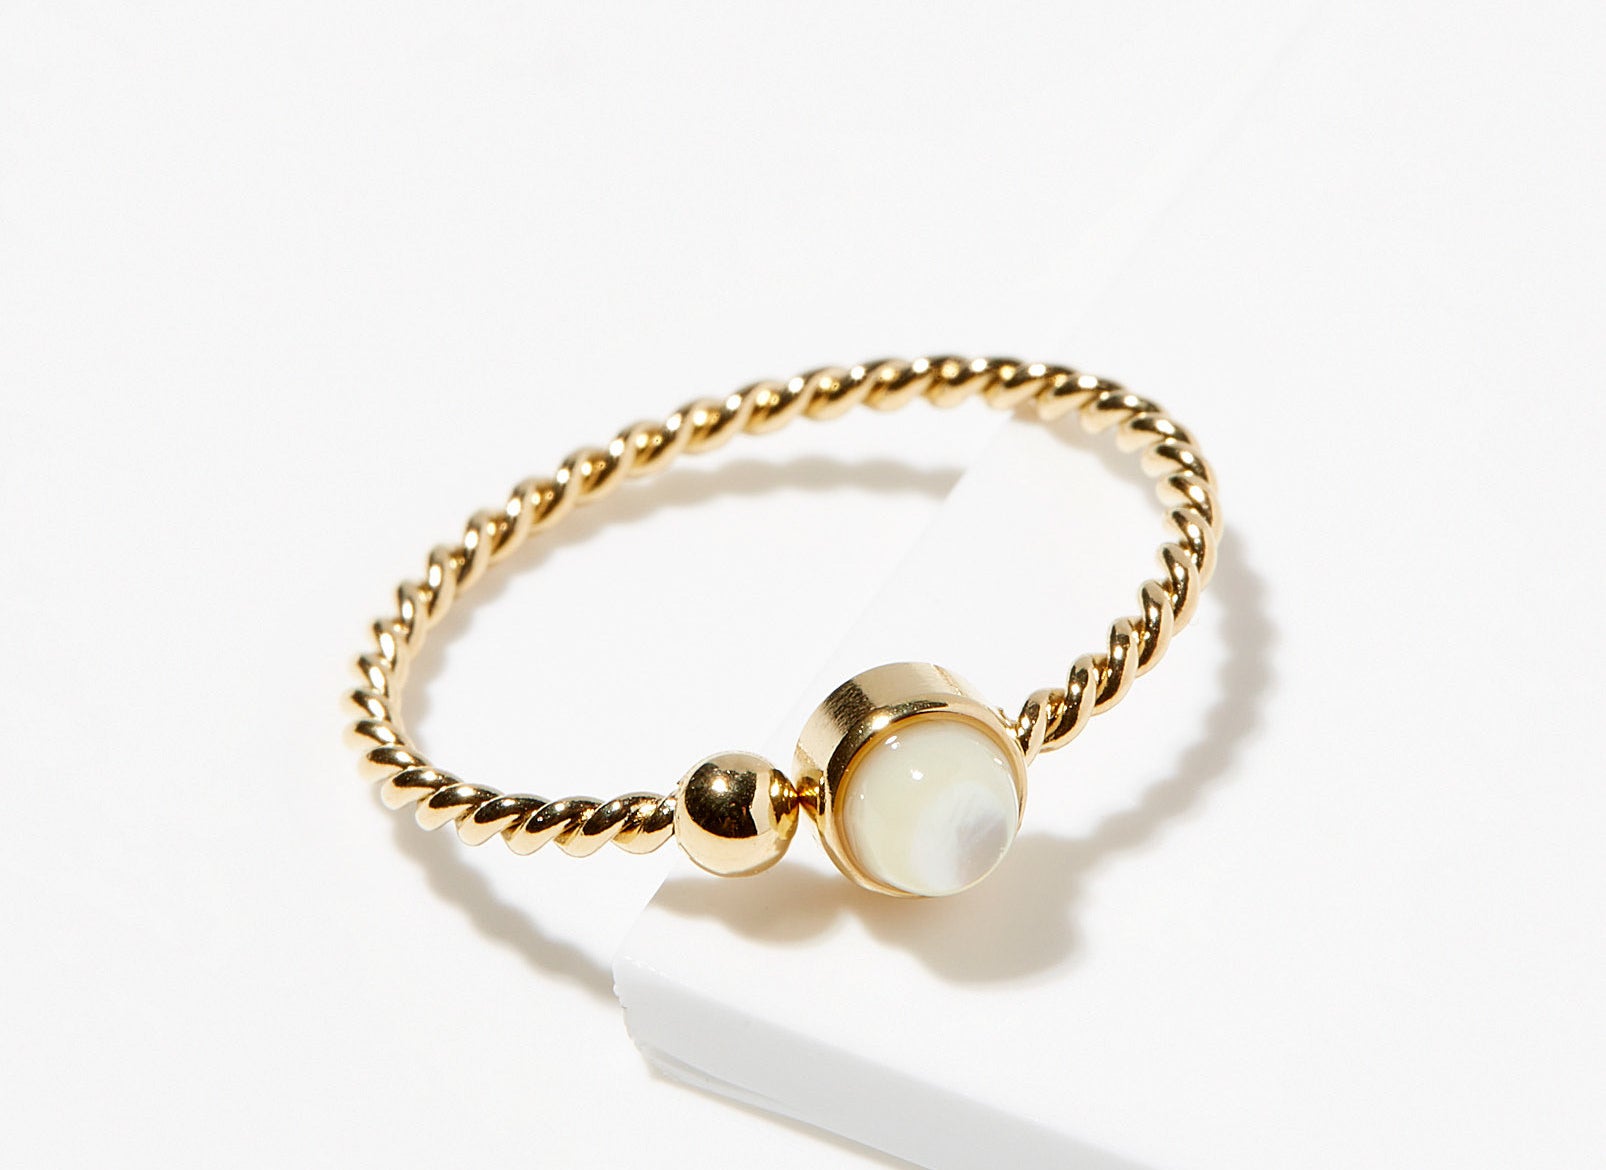 A small gold ring with a pearl jewel at the center